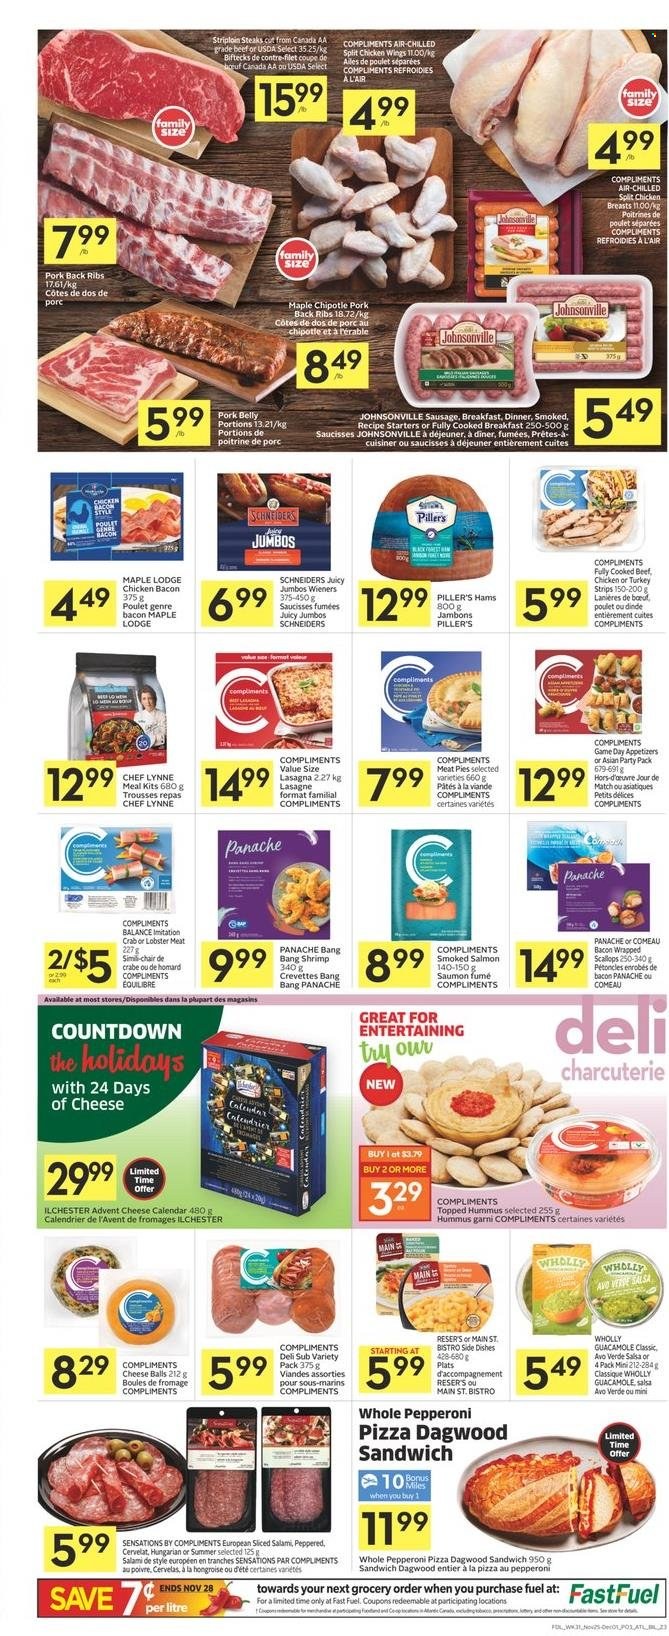 thumbnail - Co-op Flyer - November 25, 2021 - December 01, 2021 - Sales products - lobster, salmon, scallops, smoked salmon, crab, shrimps, pizza, dagwood, lasagna meal, bacon, salami, Johnsonville, sausage, pepperoni, hummus, guacamole, chicken wings, strips, salsa, chicken breasts, beef meat, striploin steak, pork belly, pork meat, pork ribs, pork back ribs, steak. Page 3.